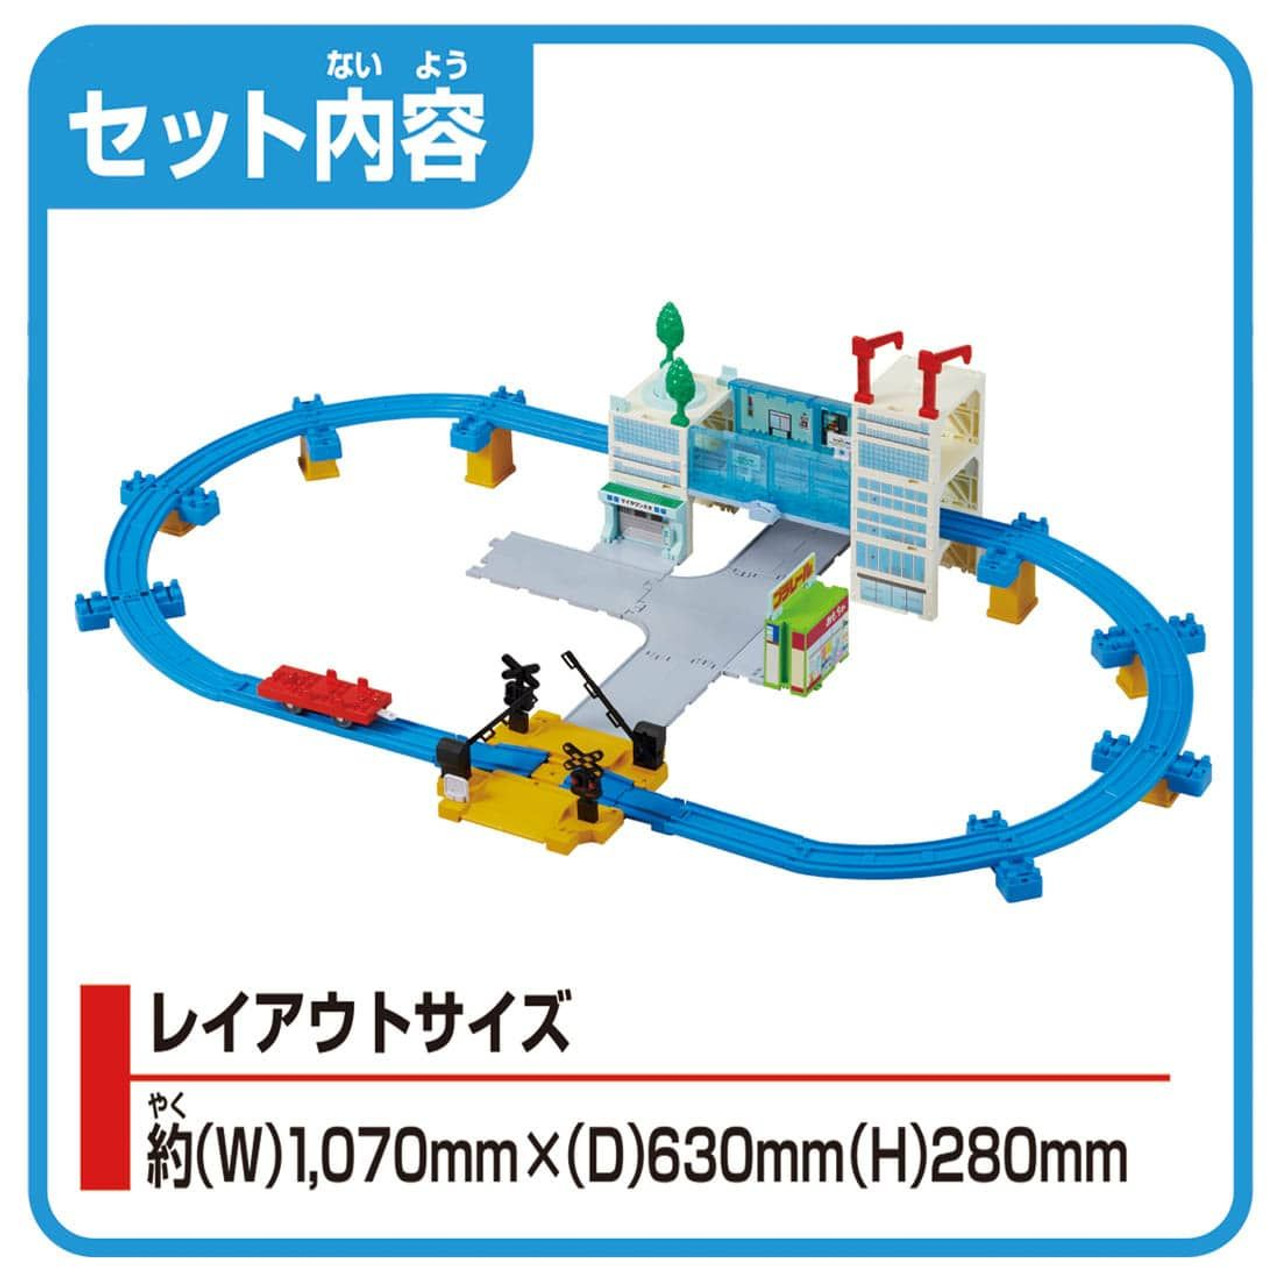 Plarail Let's Build and Run a Town! Tomica and Plarail My Town Kit